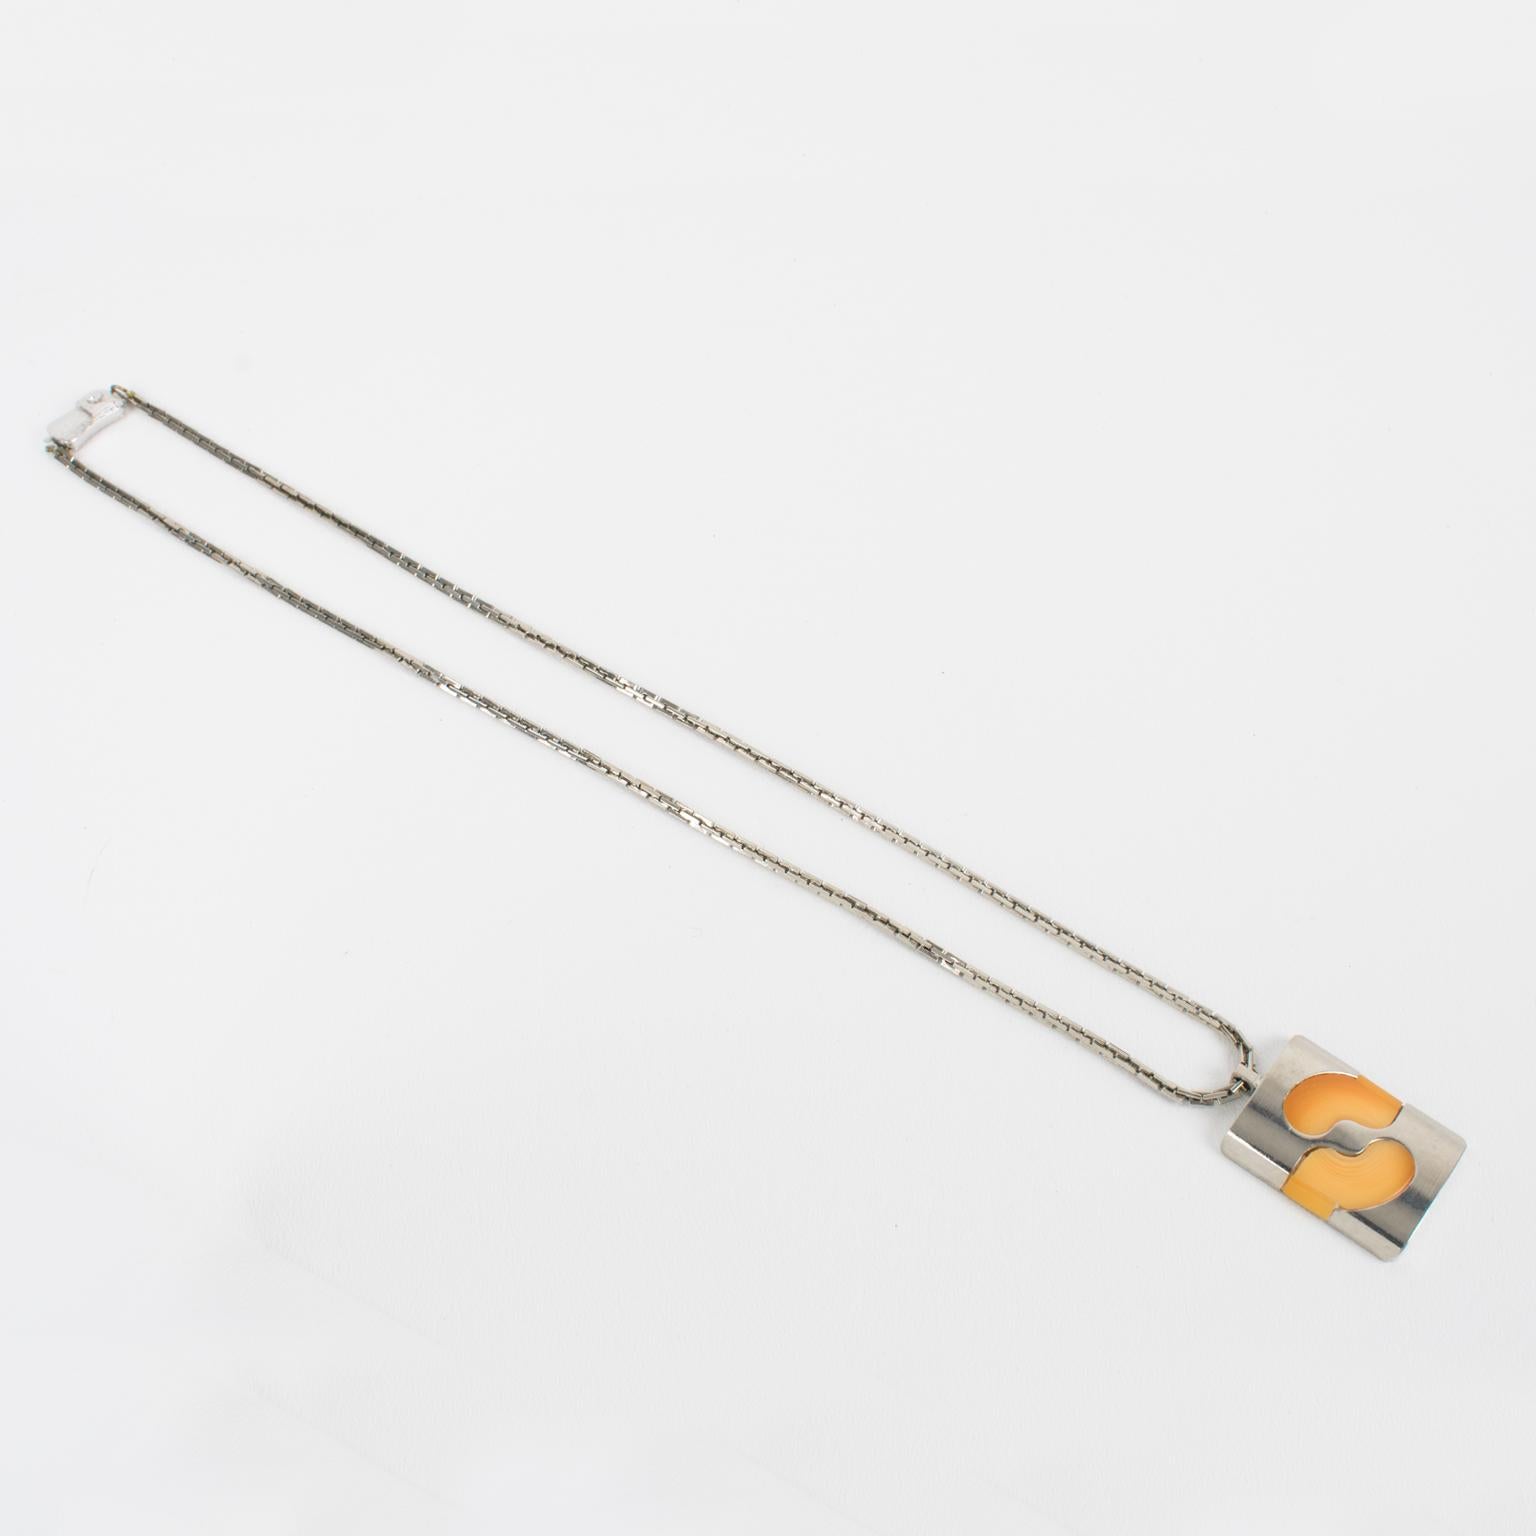 Pierre Cardin Modernist Silvered  and Yellow Resin Pendant Necklace, 1970s For Sale 1